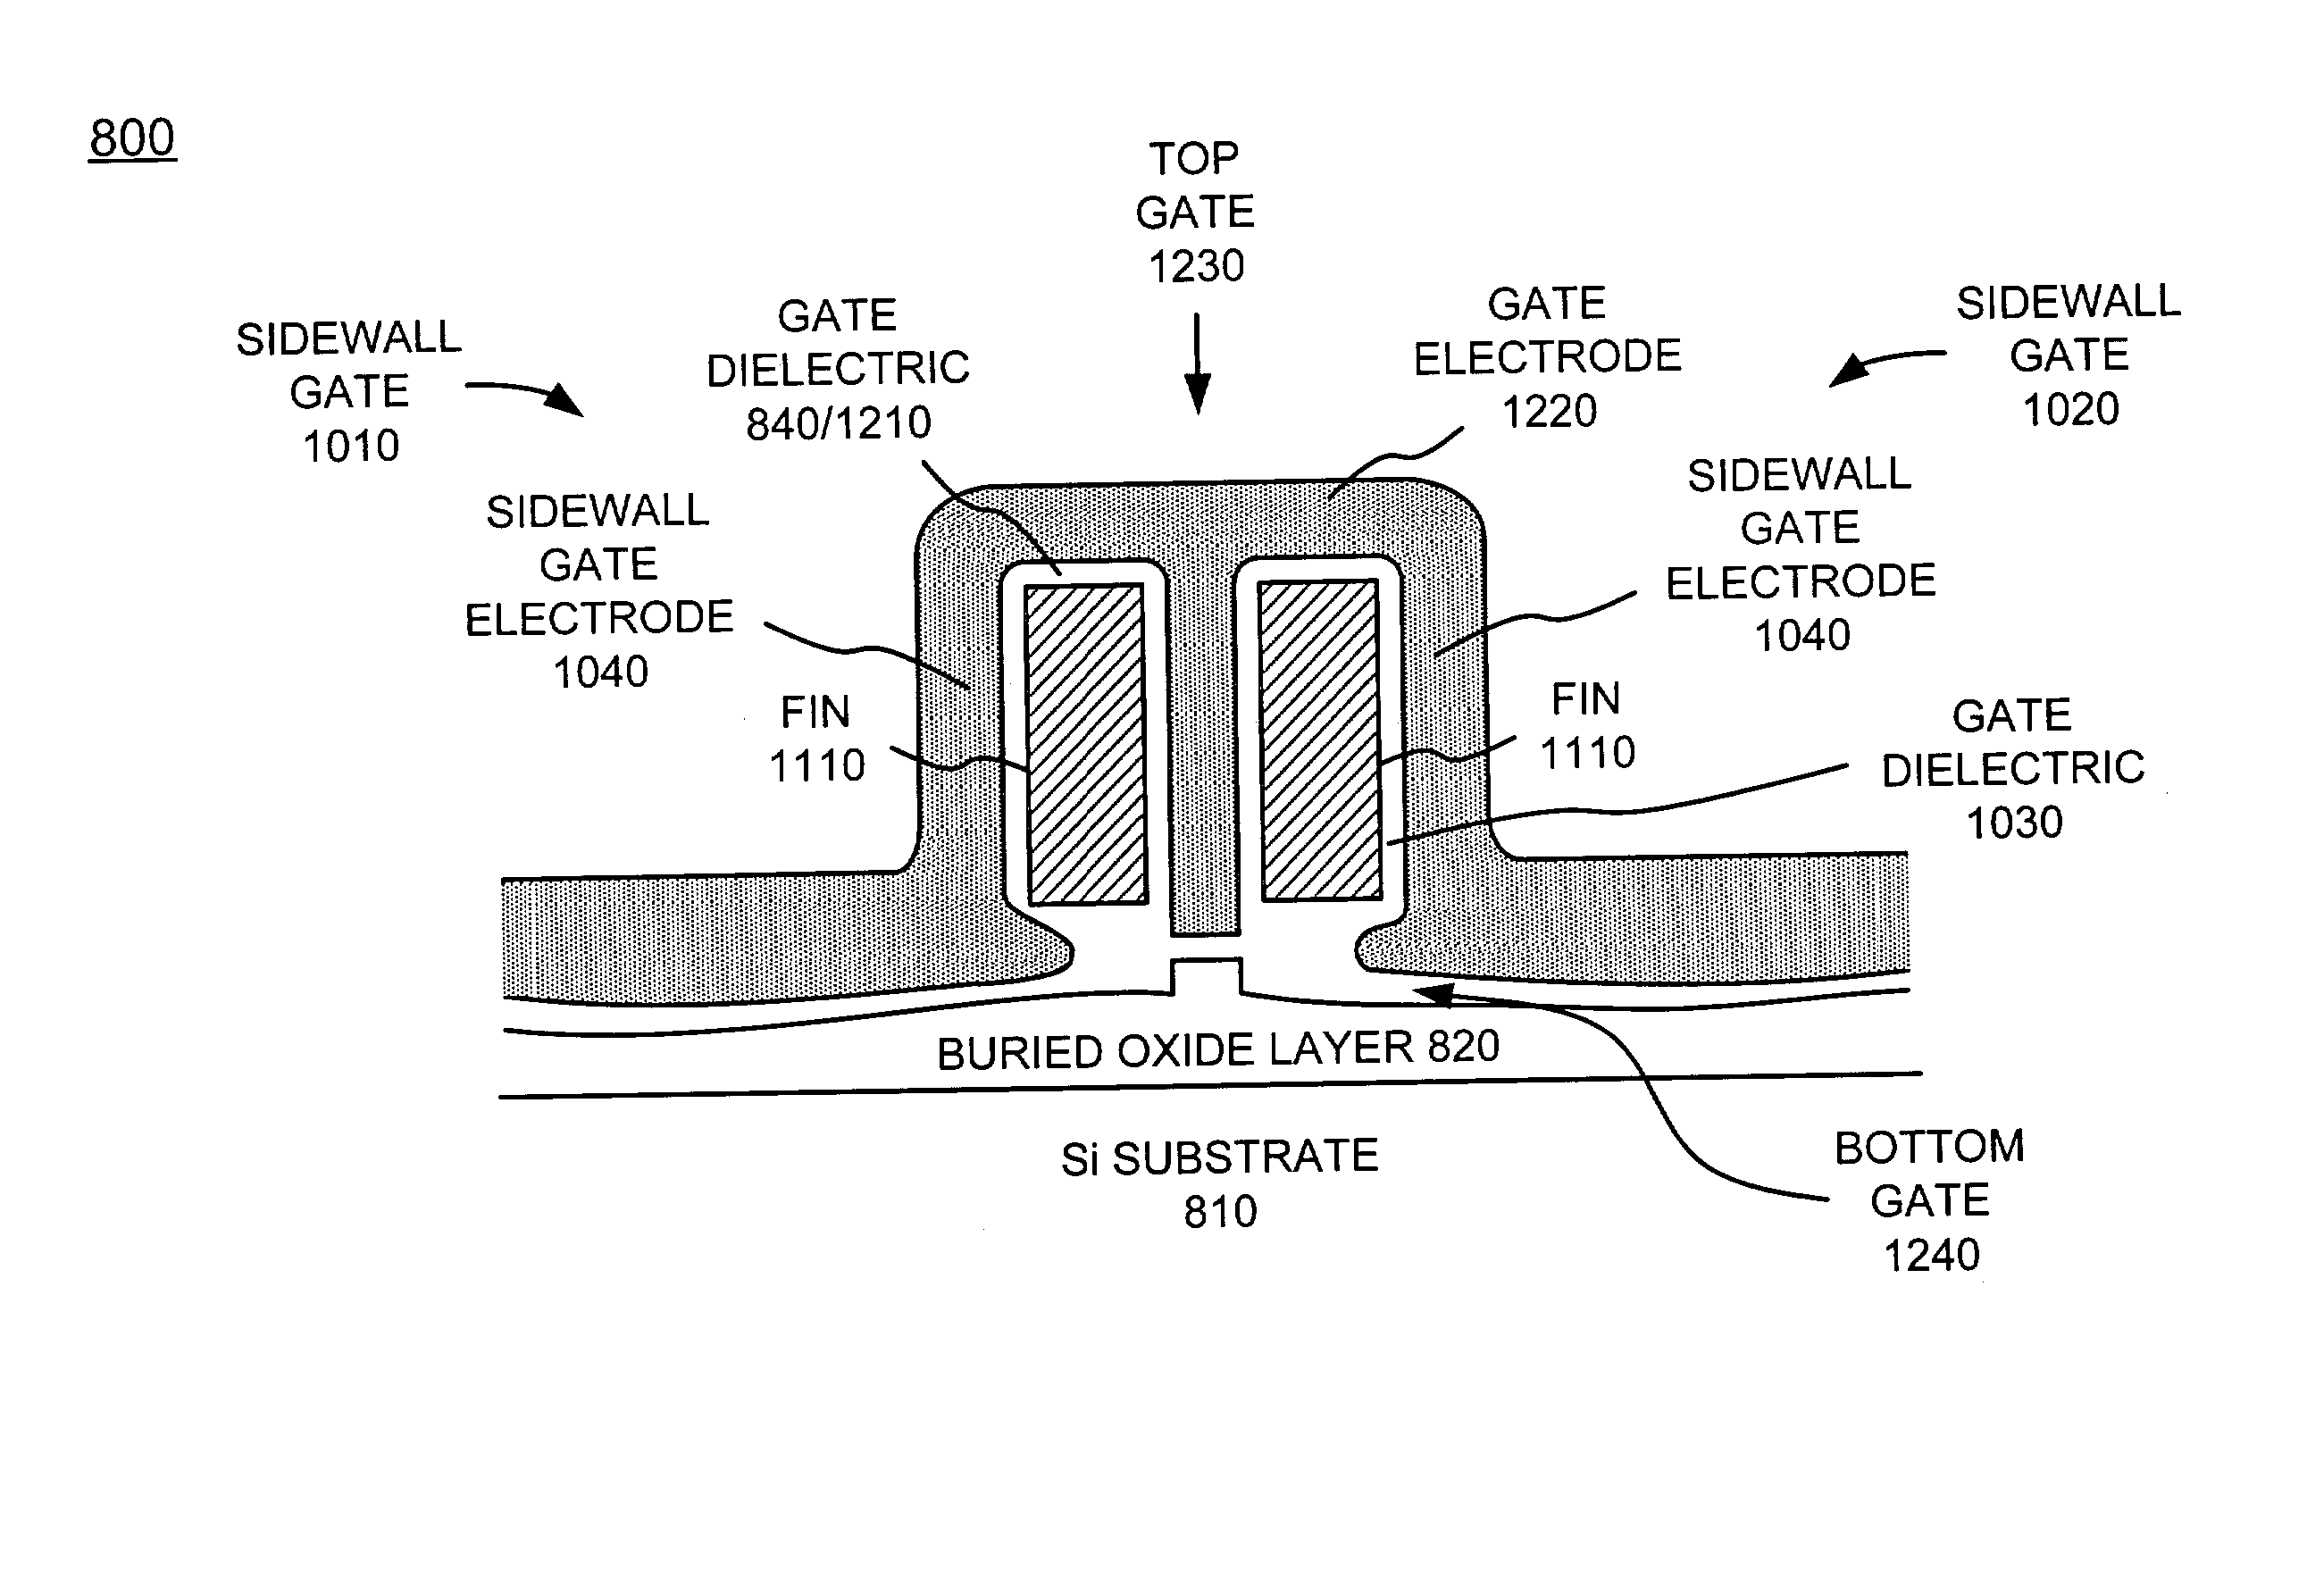 Tri-gate and gate around MOSFET devices and methods for making same